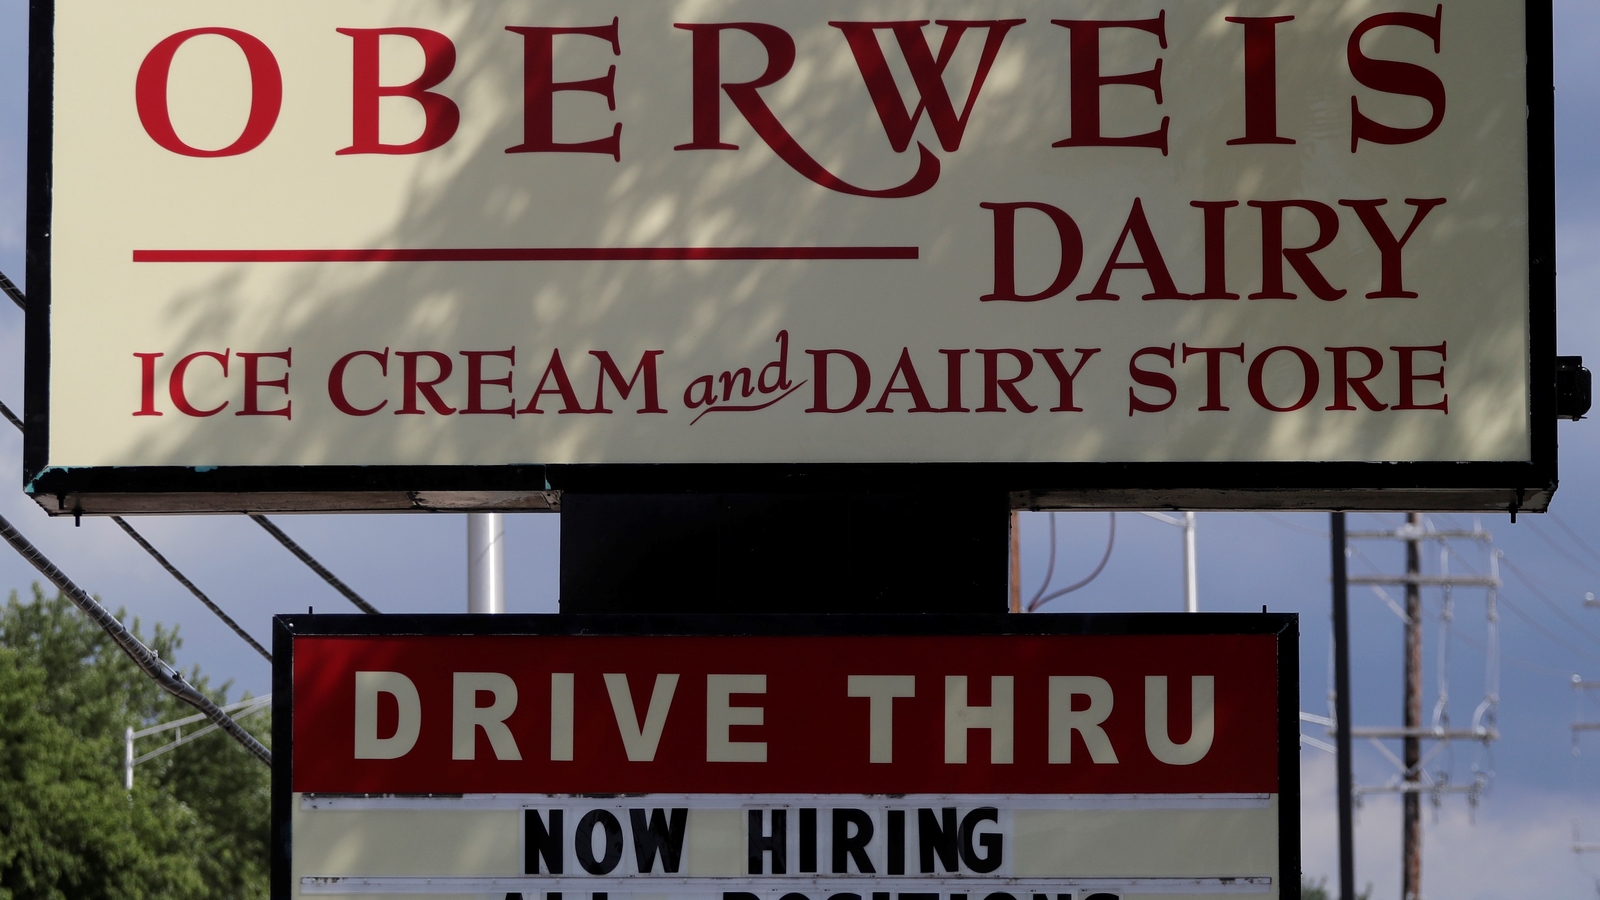 Oberweis Dairy says they have a prospective buyer in businessman Brian Boomsma after filing for bankruptcy protection, lay offs [Video]